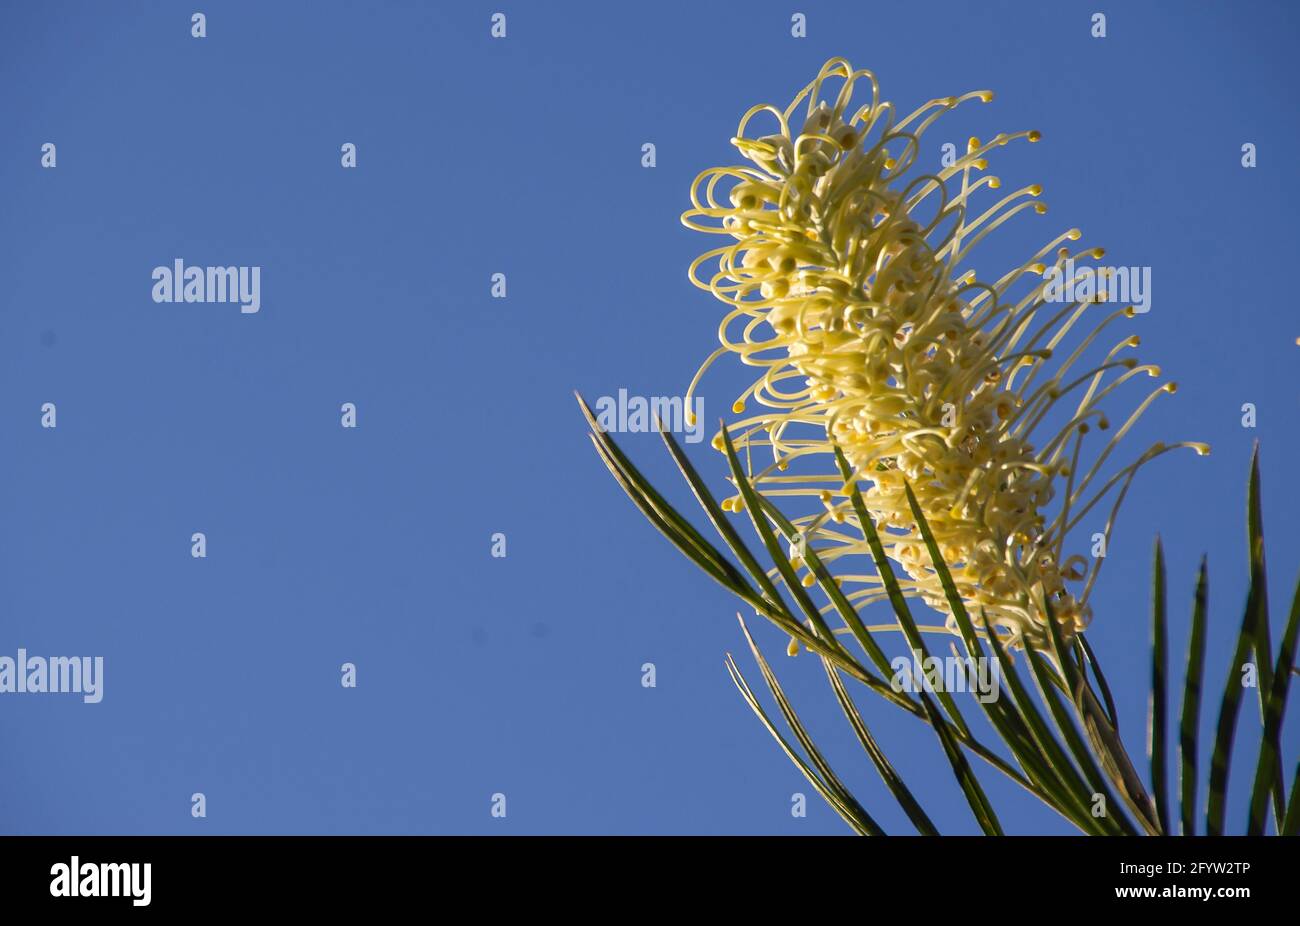 Single creamy-white flower-head of Grevillea 'Moonlight' contrasting with clear blue sky. Garden, winter, Queensland, Australia. Copy space. Stock Photo